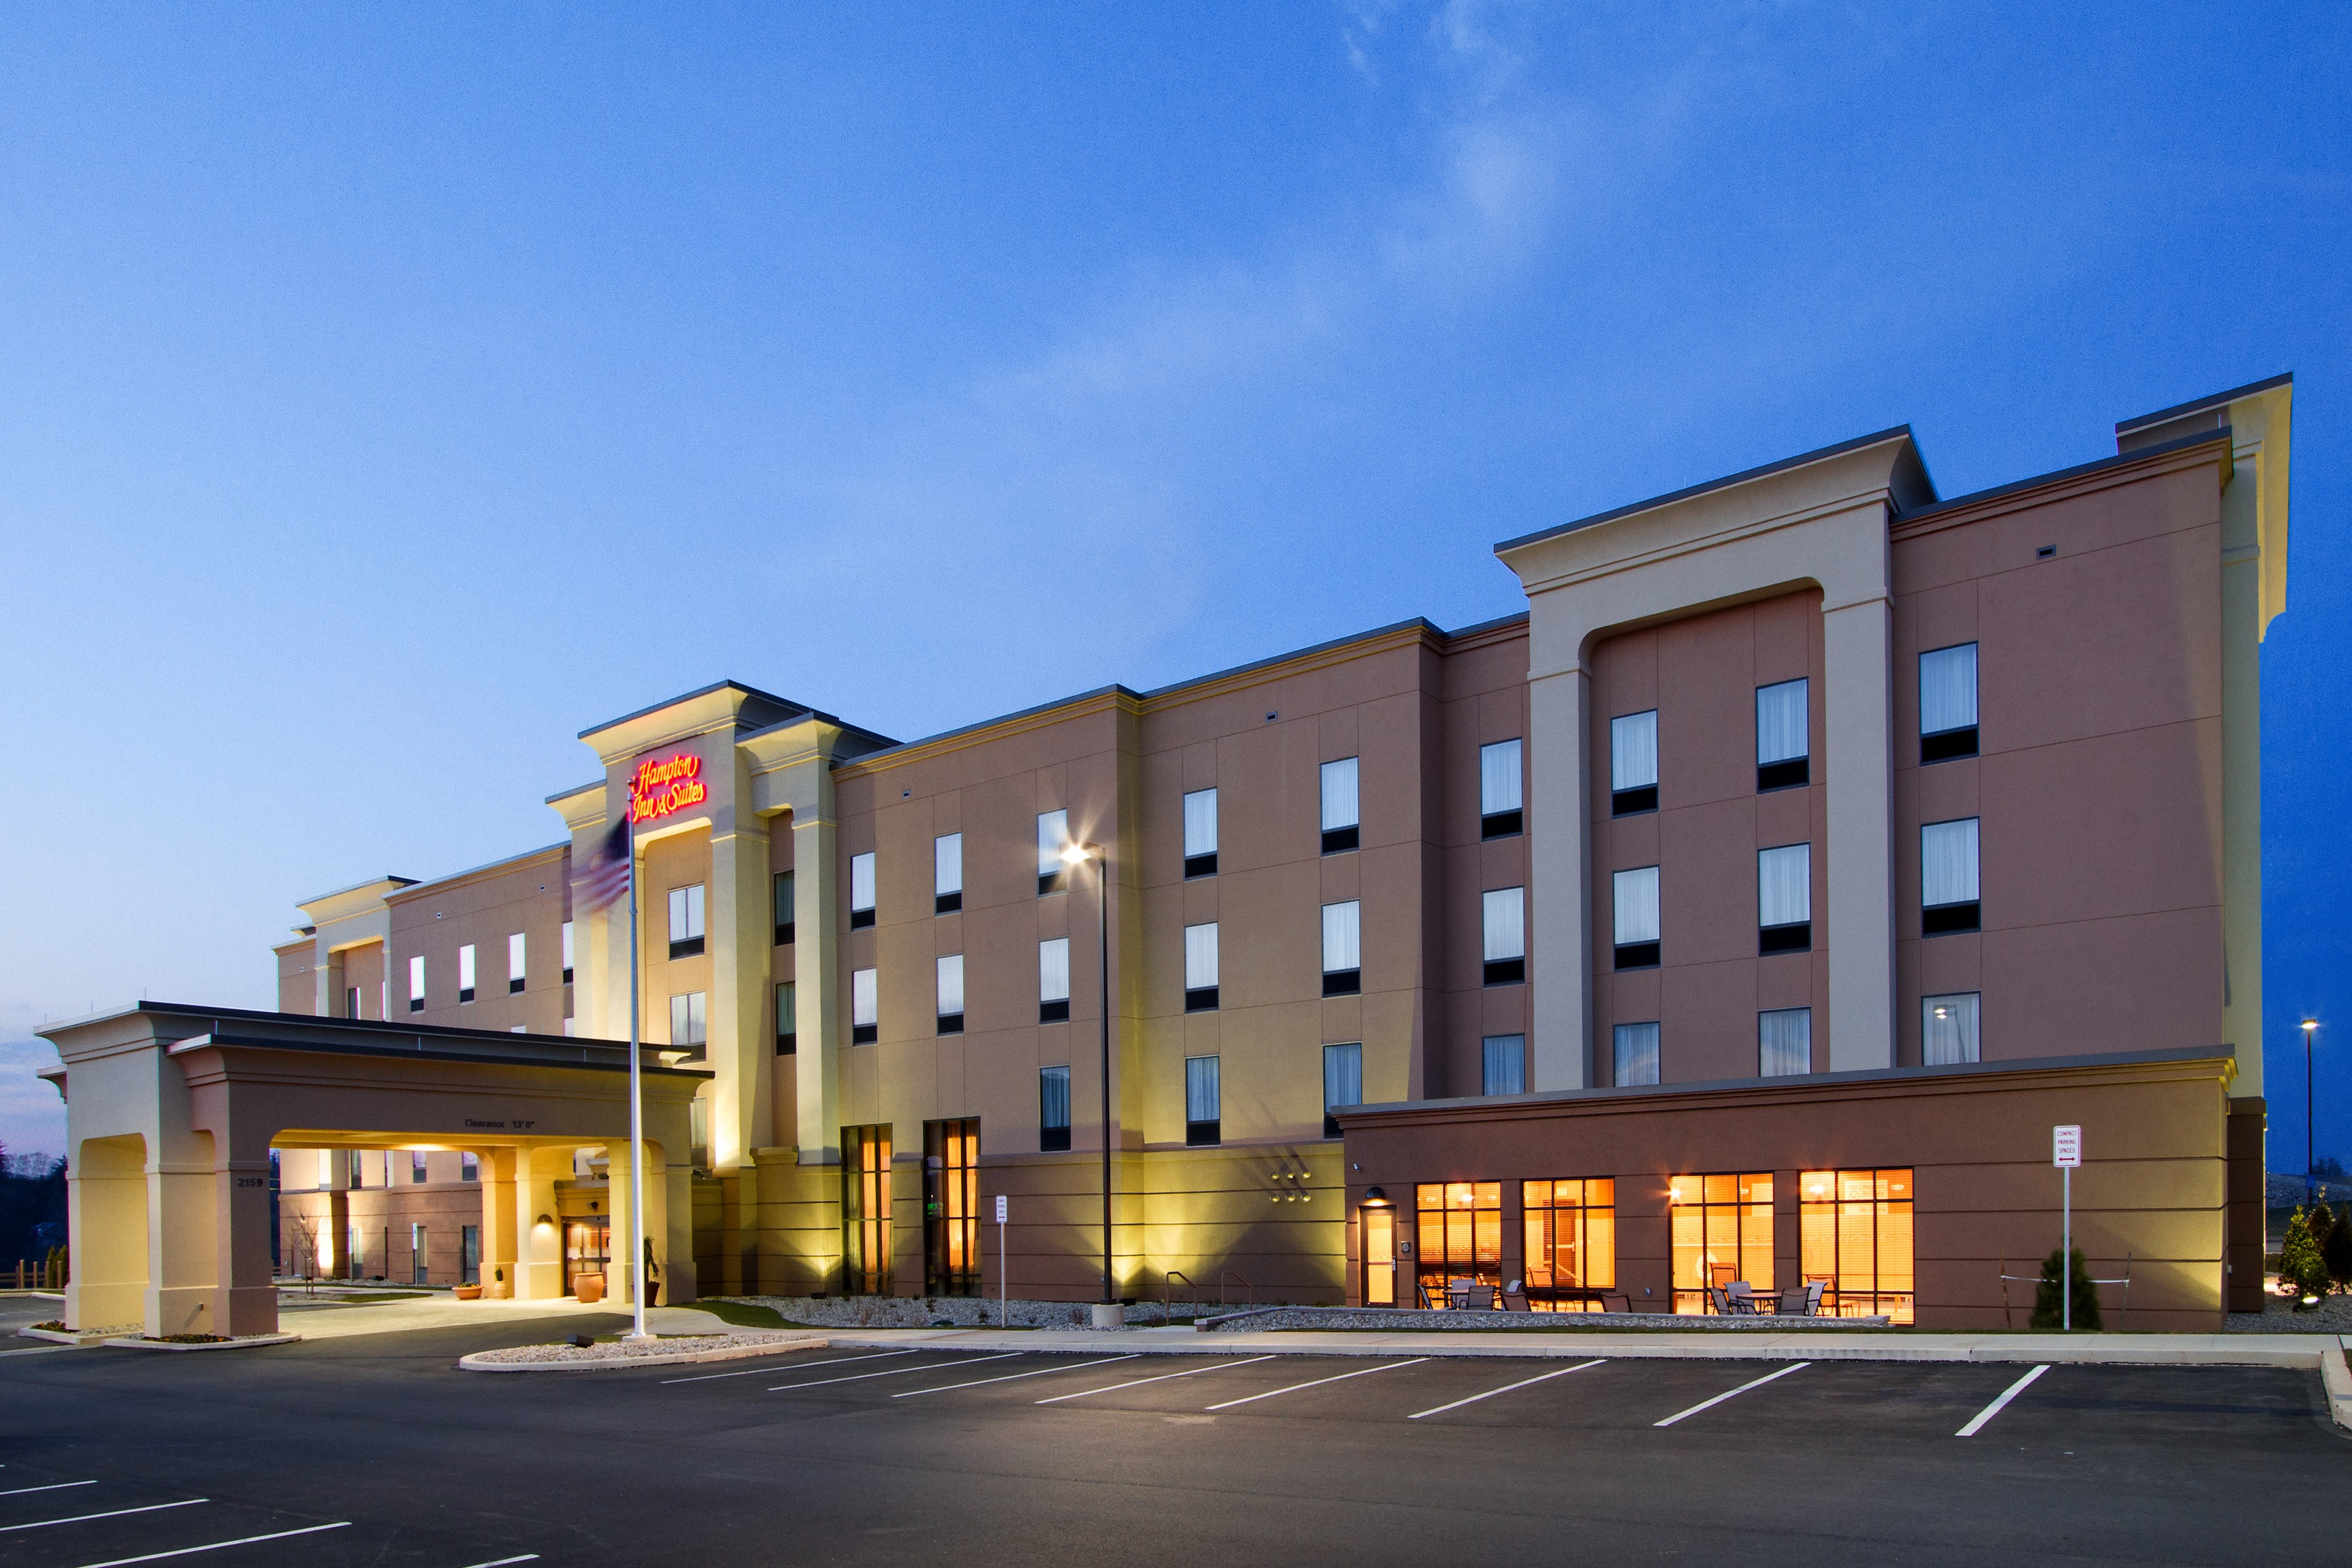 The Hampton Inn & Suites - York South is just one of many convenient lodging options for you and your guests.